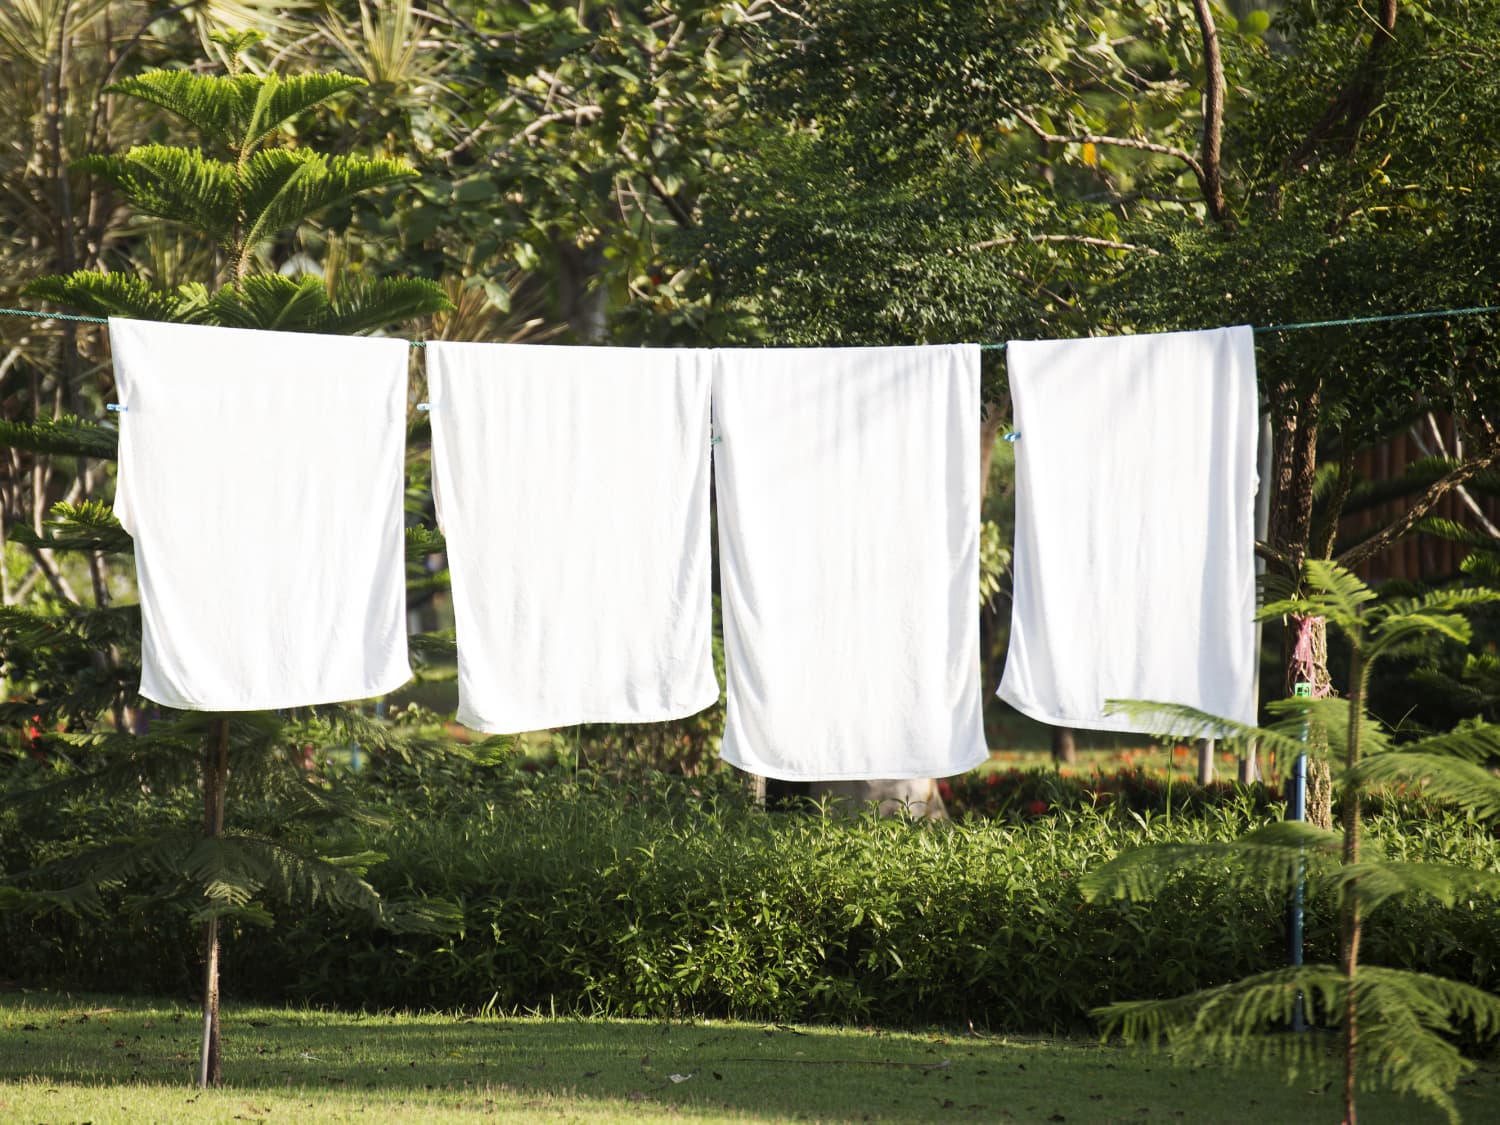 I Installed a Retractable Clothesline in the Yard to Line-Dry My